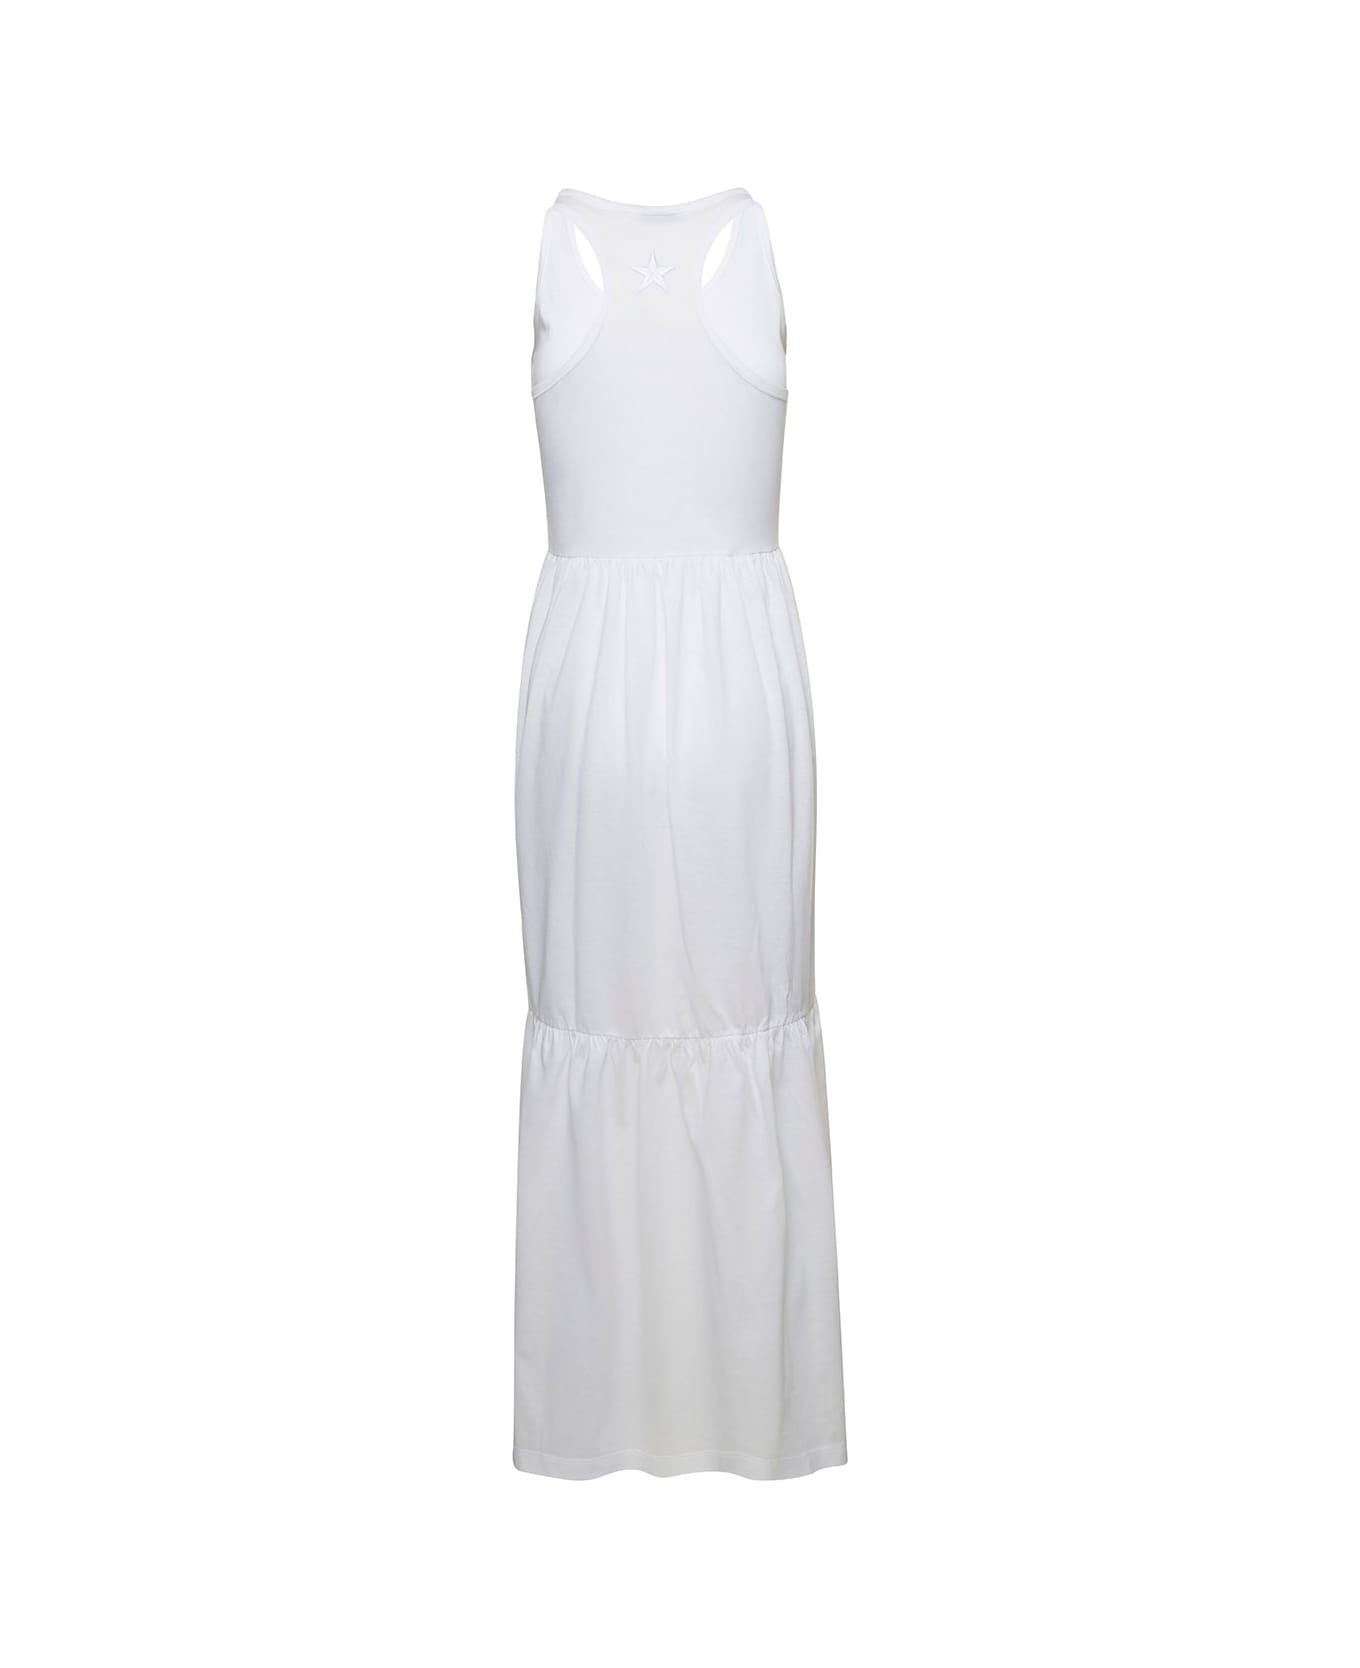 Douuod Long White Sleeveless Dress With Flounced Skirt In Cotton Woman - White ワンピース＆ドレス